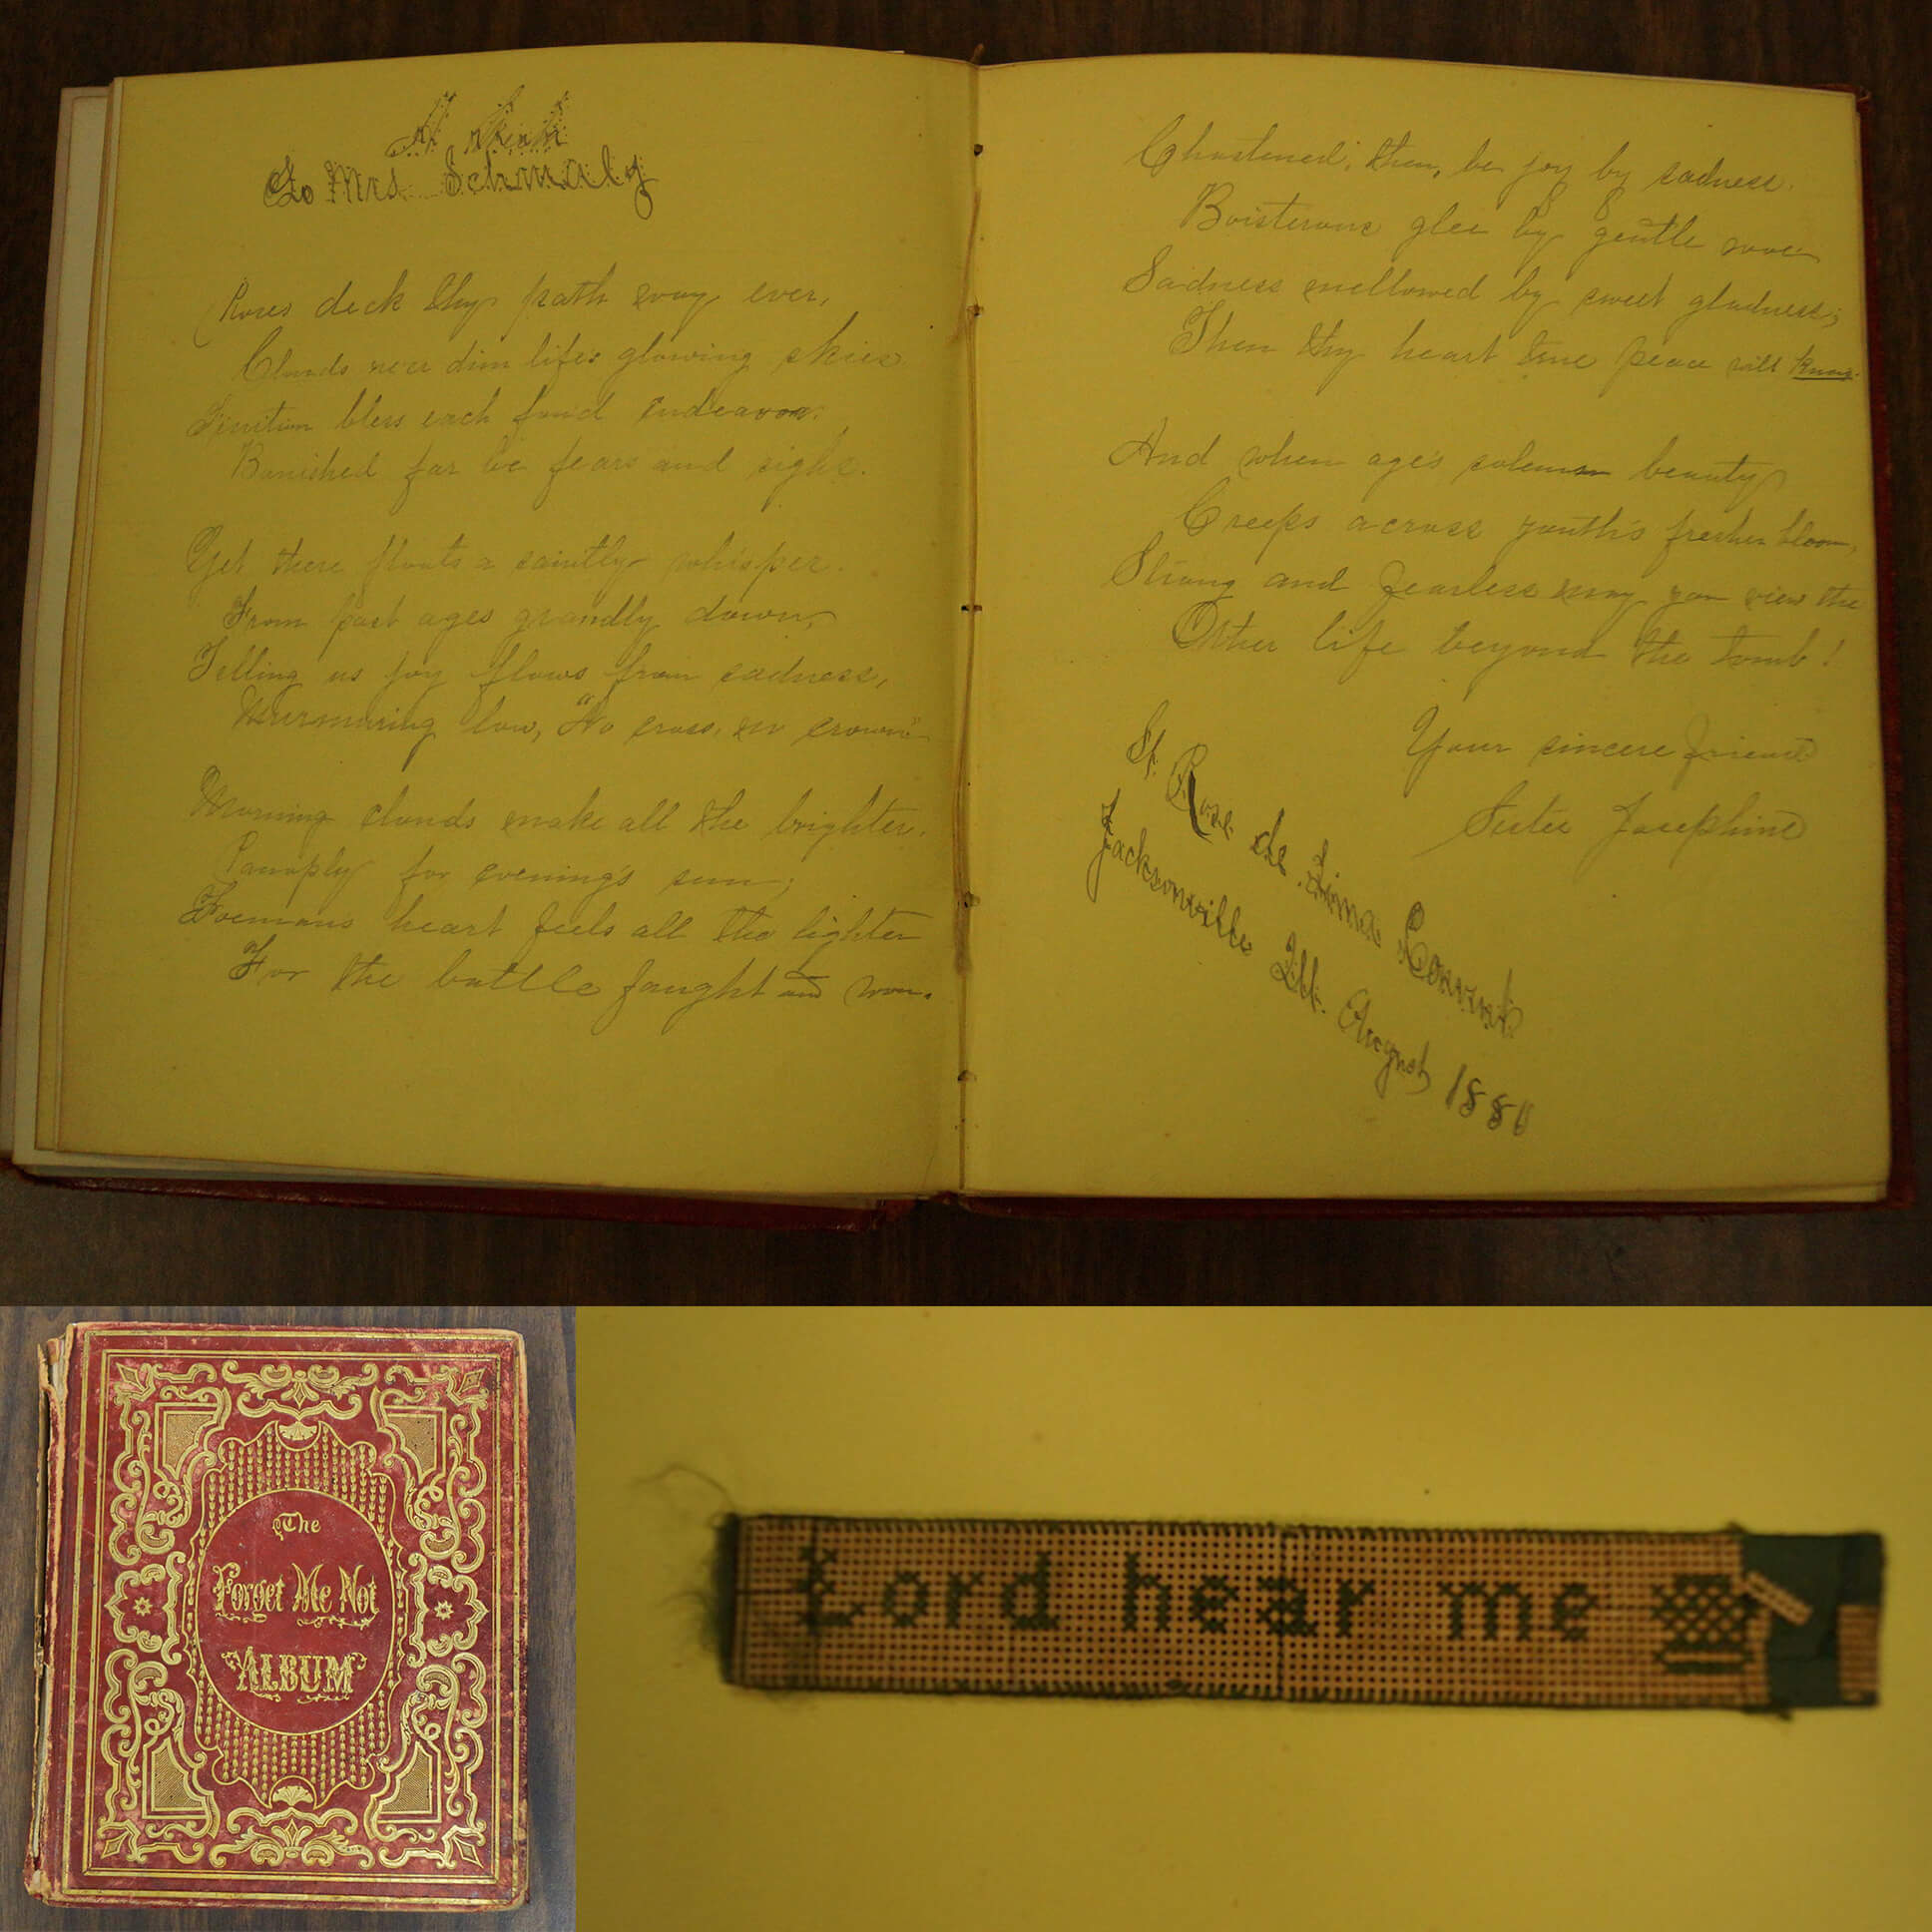 Note by Sister Josephine; St. Rose de Lima Convent; Jacksonville, Ill. August 1880